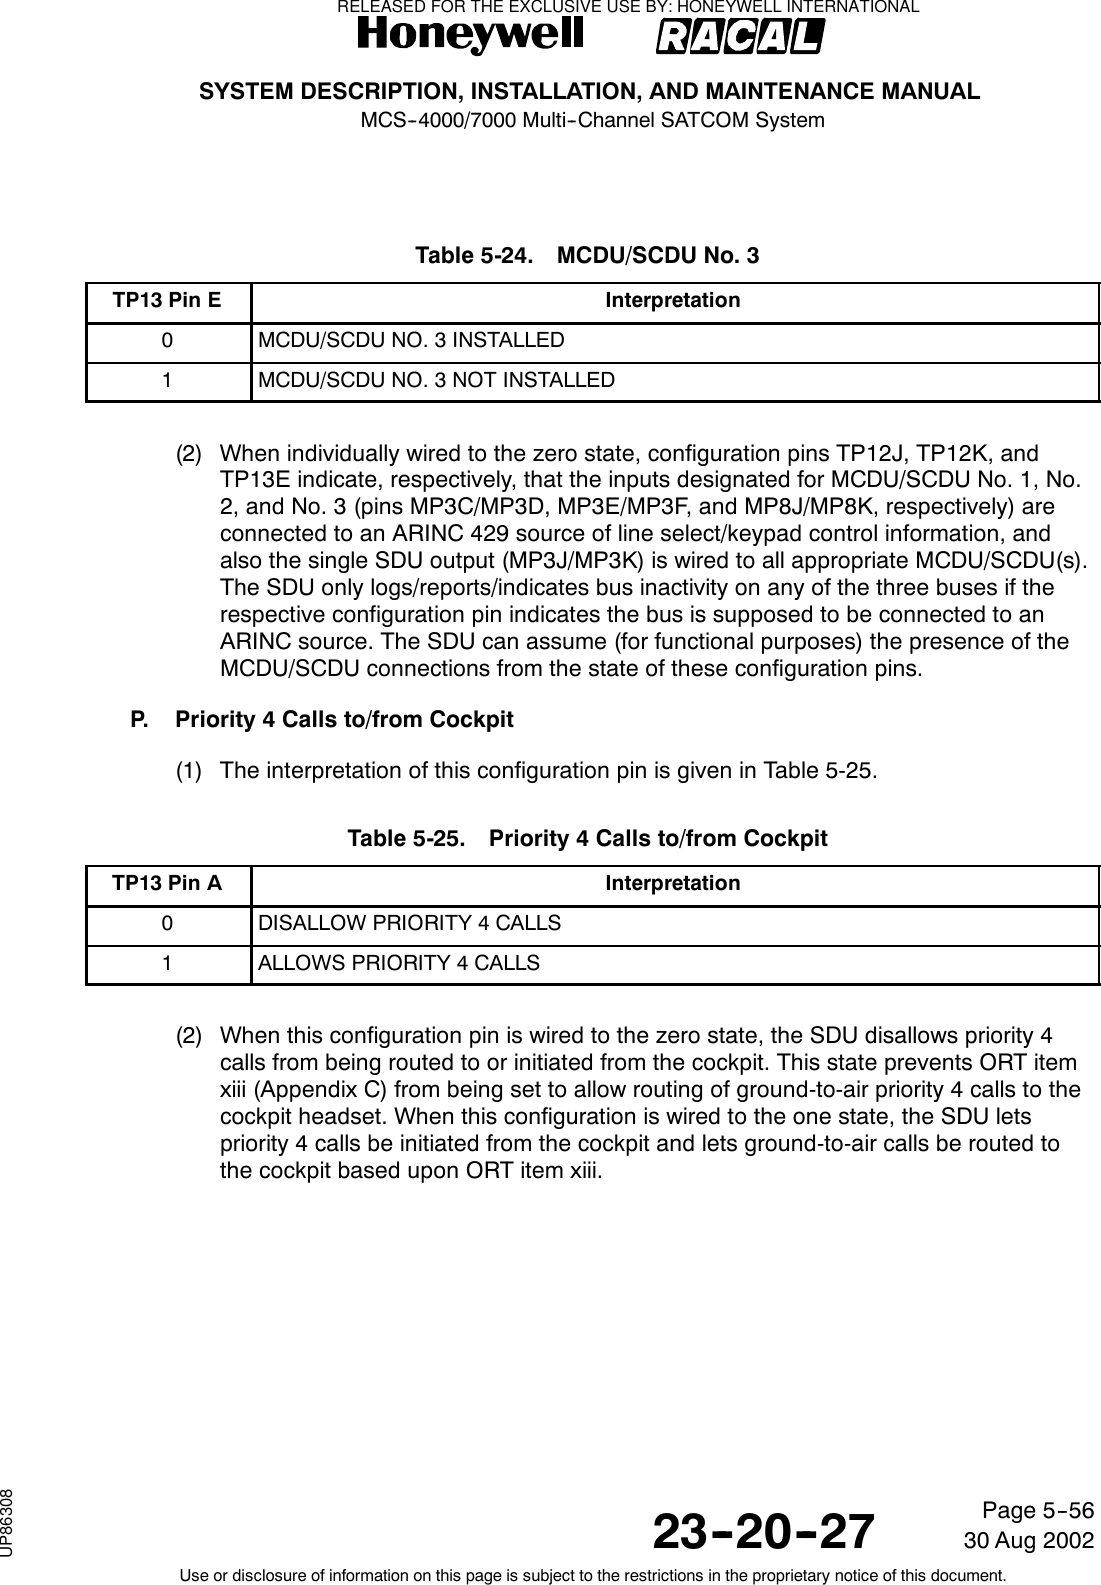 SYSTEM DESCRIPTION, INSTALLATION, AND MAINTENANCE MANUALMCS--4000/7000 Multi--Channel SATCOM System23--20--2730 Aug 2002Use or disclosure of information on this page is subject to the restrictions in the proprietary notice of this document.Page 5--56Table 5-24. MCDU/SCDU No. 3TP13 Pin E Interpretation0MCDU/SCDU NO. 3 INSTALLED1MCDU/SCDU NO. 3 NOT INSTALLED(2) When individually wired to the zero state, configuration pins TP12J, TP12K, andTP13E indicate, respectively, that the inputs designated for MCDU/SCDU No. 1, No.2, and No. 3 (pins MP3C/MP3D, MP3E/MP3F, and MP8J/MP8K, respectively) areconnected to an ARINC 429 source of line select/keypad control information, andalso the single SDU output (MP3J/MP3K) is wired to all appropriate MCDU/SCDU(s).The SDU only logs/reports/indicates bus inactivity on any of the three buses if therespective configuration pin indicates the bus is supposed to be connected to anARINC source. The SDU can assume (for functional purposes) the presence of theMCDU/SCDU connections from the state of these configuration pins.P. Priority 4 Calls to/from Cockpit(1) The interpretation of this configuration pin is given in Table 5-25.Table 5-25. Priority 4 Calls to/from CockpitTP13 Pin A Interpretation0DISALLOW PRIORITY 4 CALLS1ALLOWS PRIORITY 4 CALLS(2) When this configuration pin is wired to the zero state, the SDU disallows priority 4calls from being routed to or initiated from the cockpit. This state prevents ORT itemxiii (Appendix C) from being set to allow routing of ground-to-air priority 4 calls to thecockpit headset. When this configuration is wired to the one state, the SDU letspriority 4 calls be initiated from the cockpit and lets ground-to-air calls be routed tothe cockpit based upon ORT item xiii.RELEASED FOR THE EXCLUSIVE USE BY: HONEYWELL INTERNATIONALUP86308